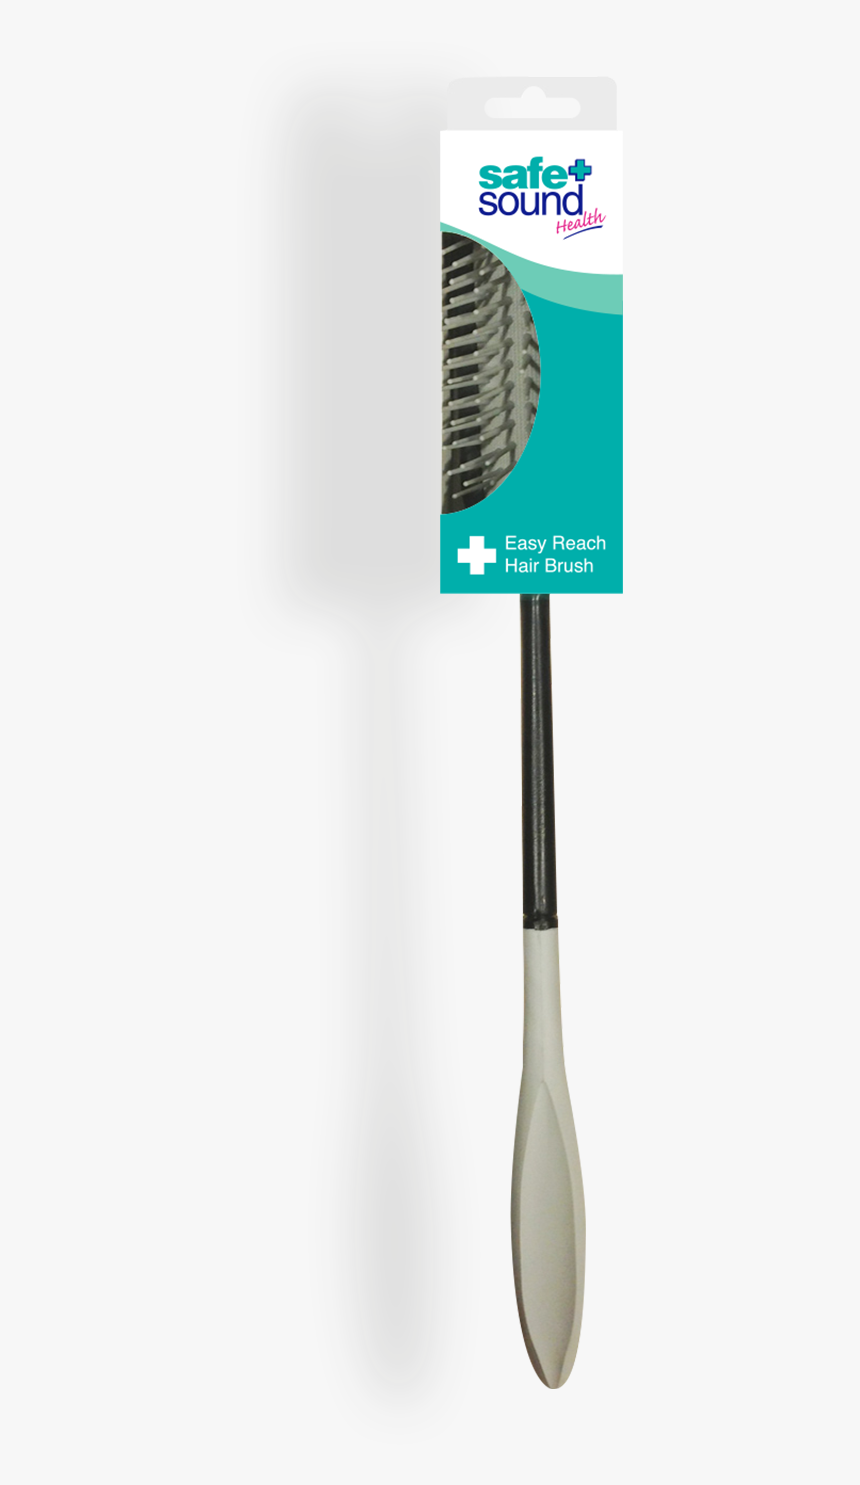 Safe And Sound Health Long-handled Hair Brush - Safe Sound Health, HD Png Download, Free Download